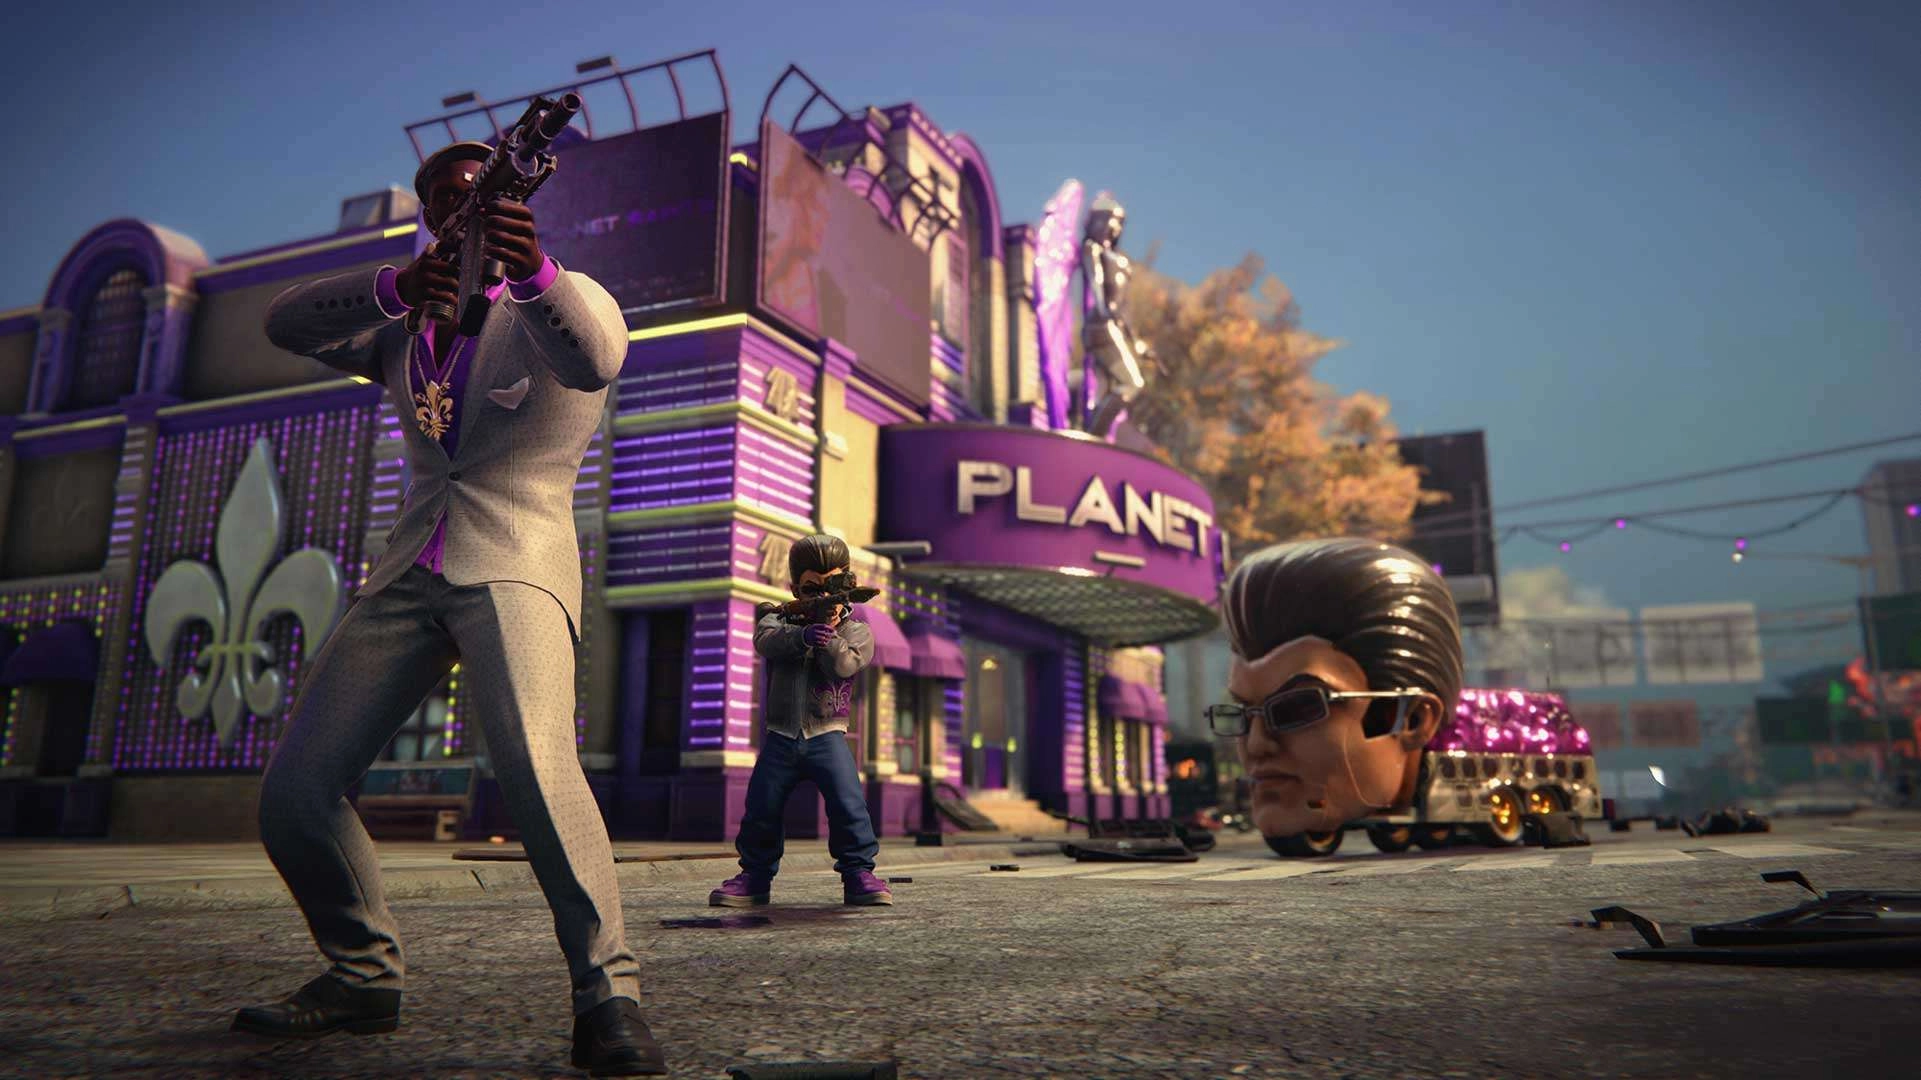 Saints Row: The Third Remastered and Automachef are free at Epic Games Store